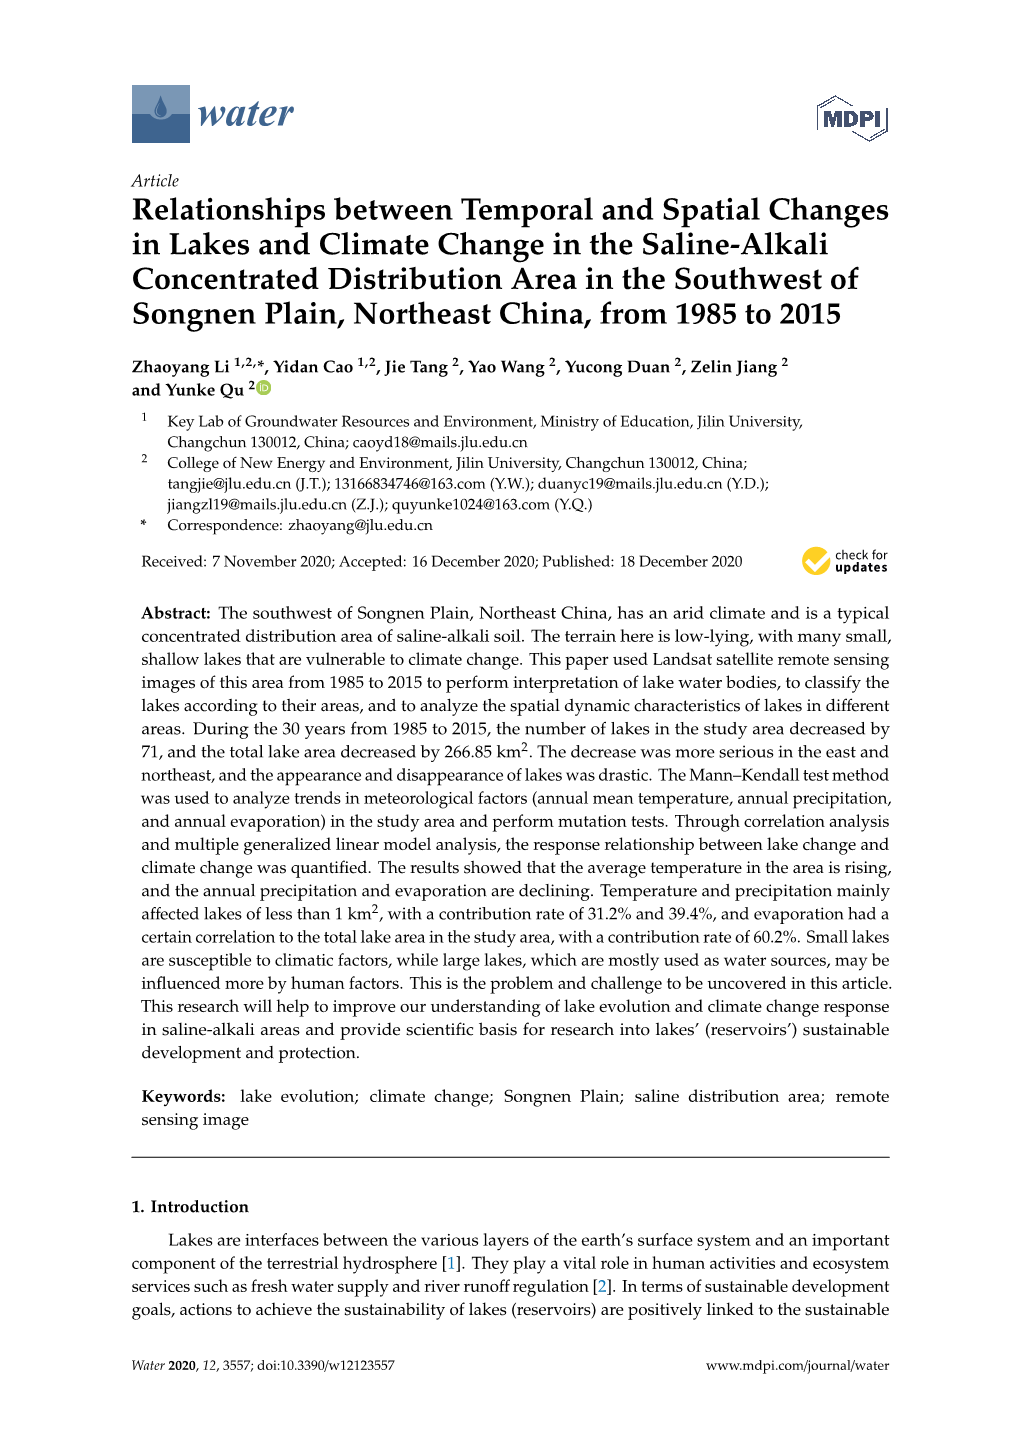 Relationships Between Temporal and Spatial Changes in Lakes